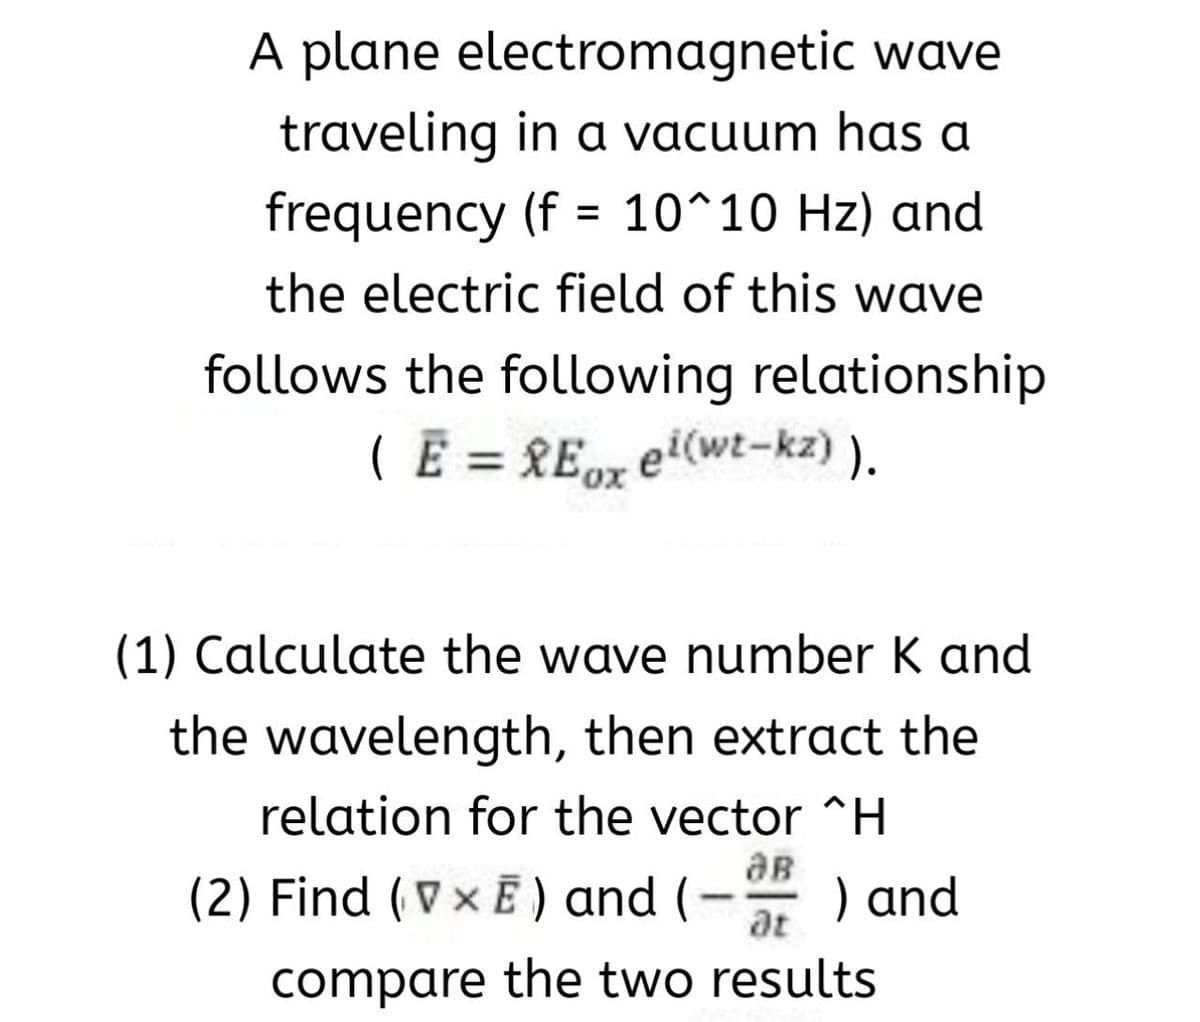 A plane electromagnetic wave
traveling in a vacuum has a
frequency (f = 10^10 Hz) and
%3D
the electric field of this wave
follows the following relationship
( E = REpx ei(wt-kz) ).
(1) Calculate the wave number K and
the wavelength, then extract the
relation for the vector ^H
aB
(2) Find (Vx E ) and (- ) and
at
compare the two results
